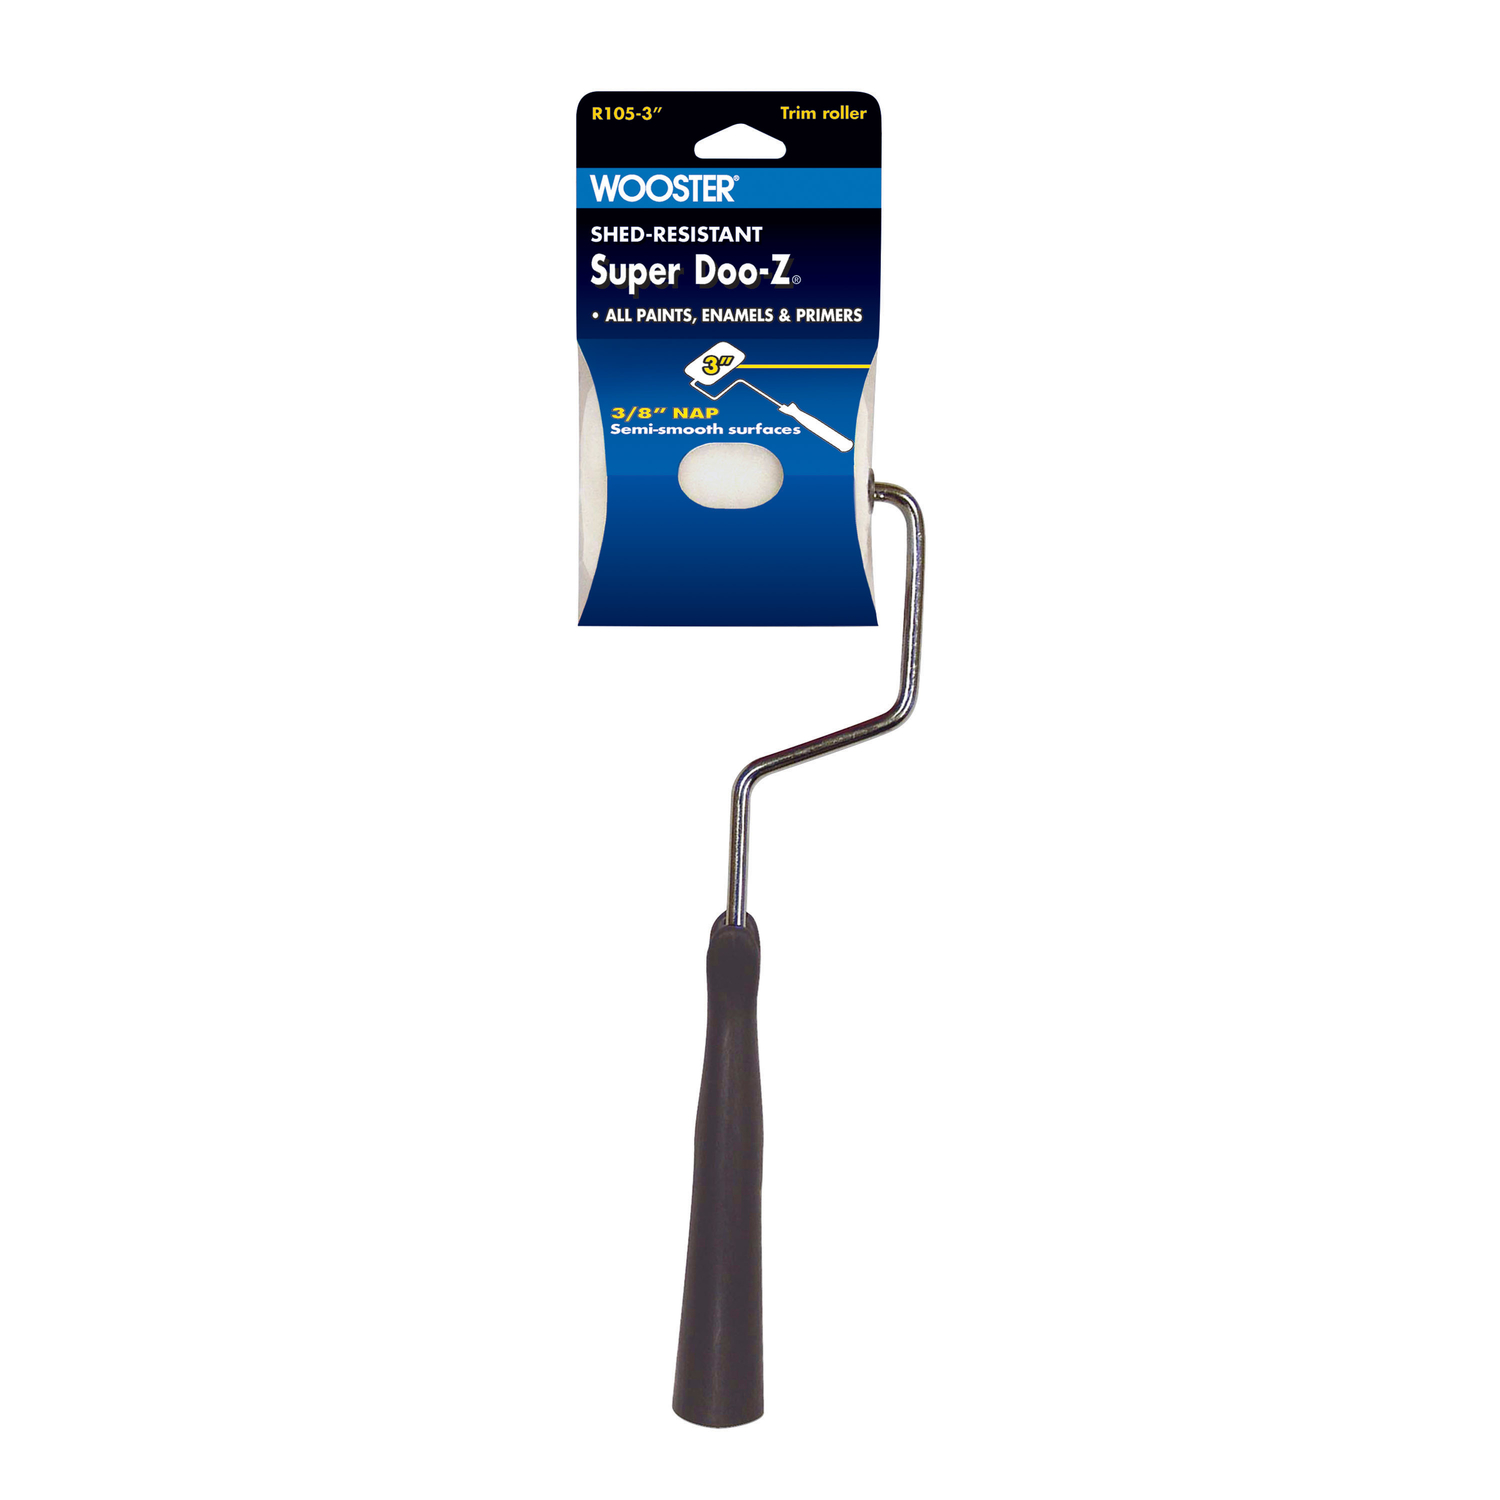 Photos - Putty Knife / Painting Tool Wooster Super Doo-Z 3 in. W Trim Paint Roller Frame and Cover Threaded End